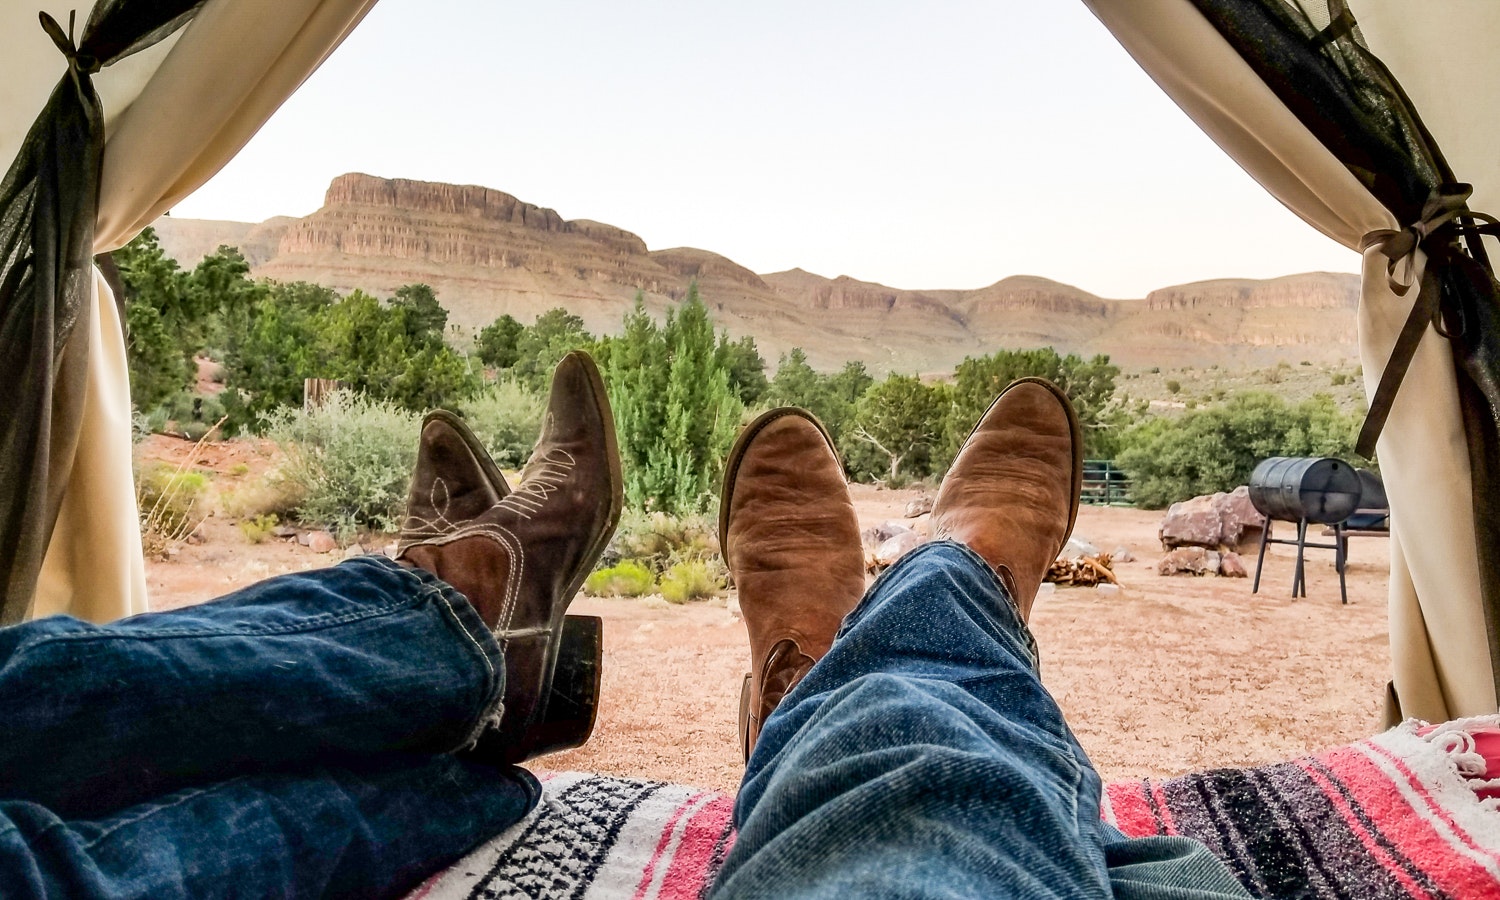 Two sets of cowboy-booted legs crossed under the opening of a tent, with a western view outside